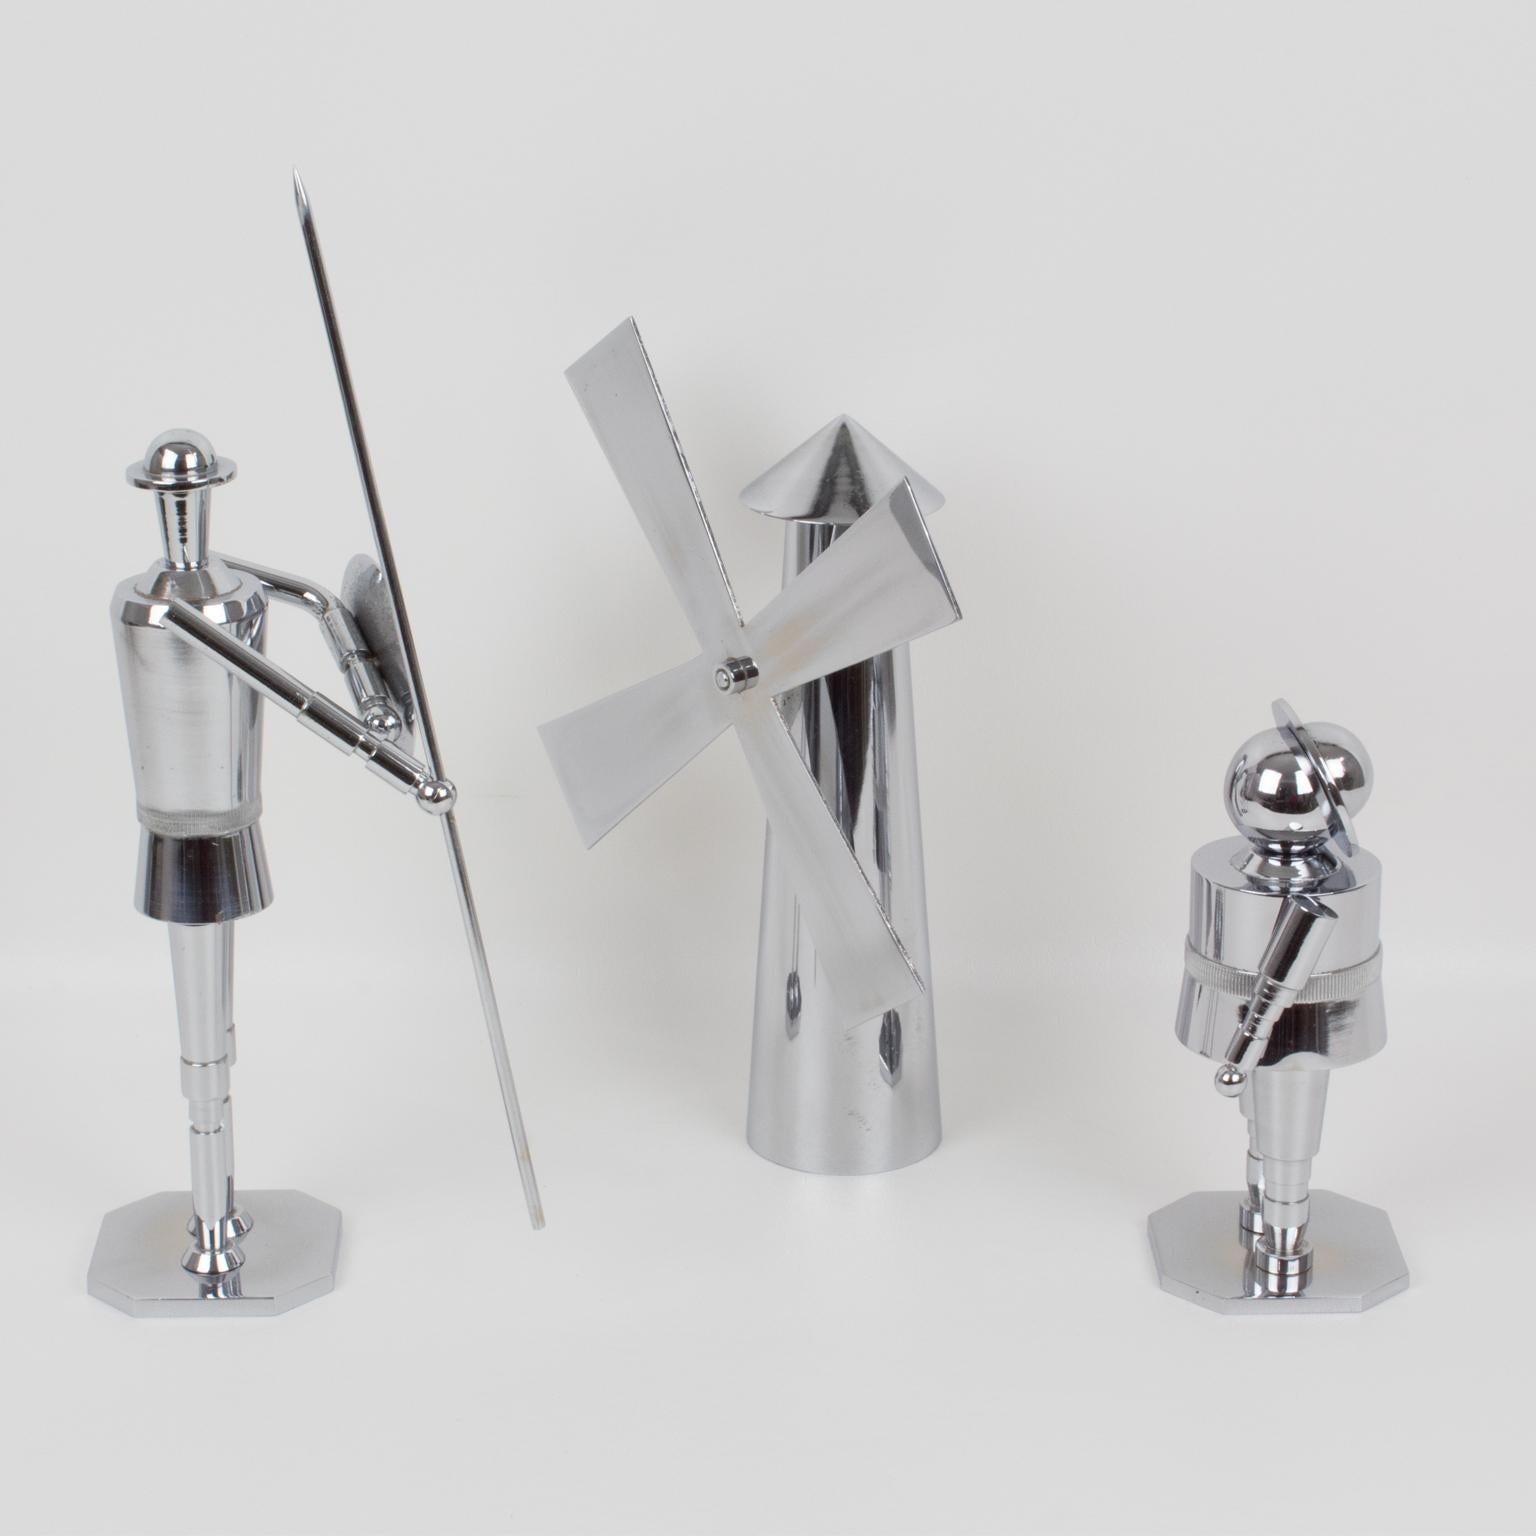 A stunning trio of Machine Age chromed metal sculptures, featuring Don Quixote, Sancho Panza, and a windmill. Incredible precise metal sculpture works with Machine Age stylized robot look in heavy chromed brass.
Don Quixote, a Spanish novel by